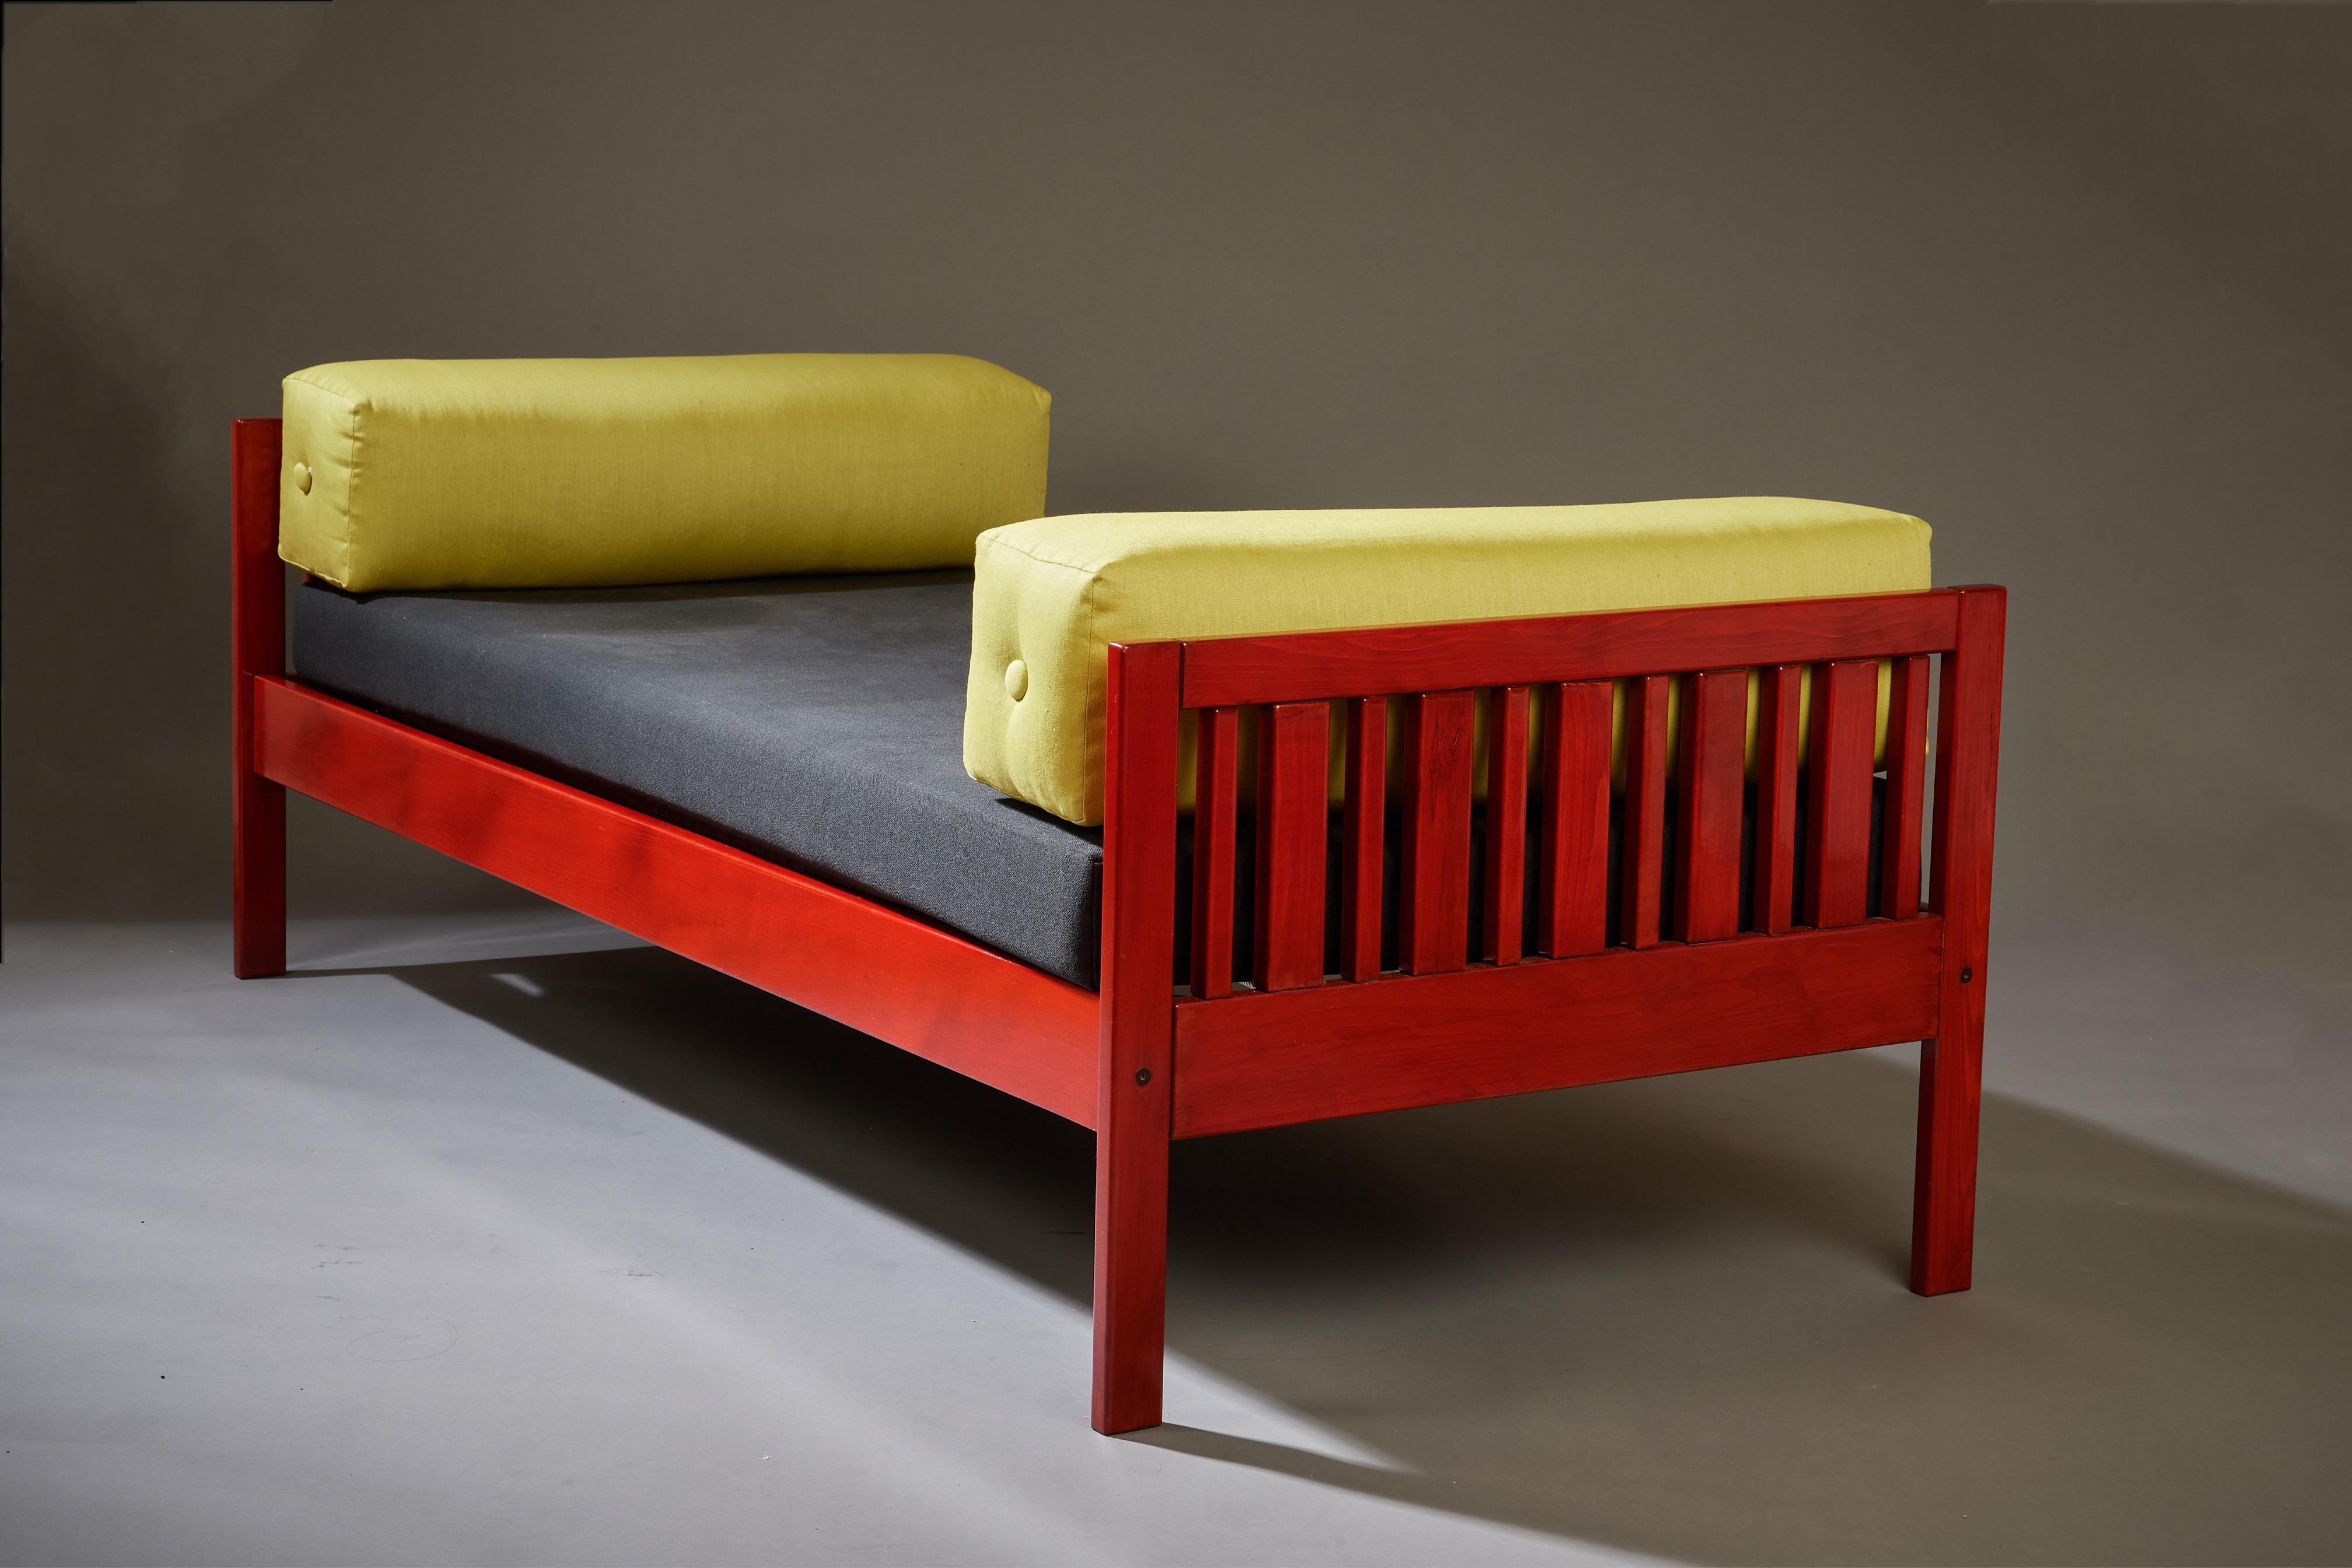 Ettore Sottsass Daybed, Red Lacquered Wood, Chartreuse Upholstery, Italy c. 1962 In Good Condition For Sale In New York, NY